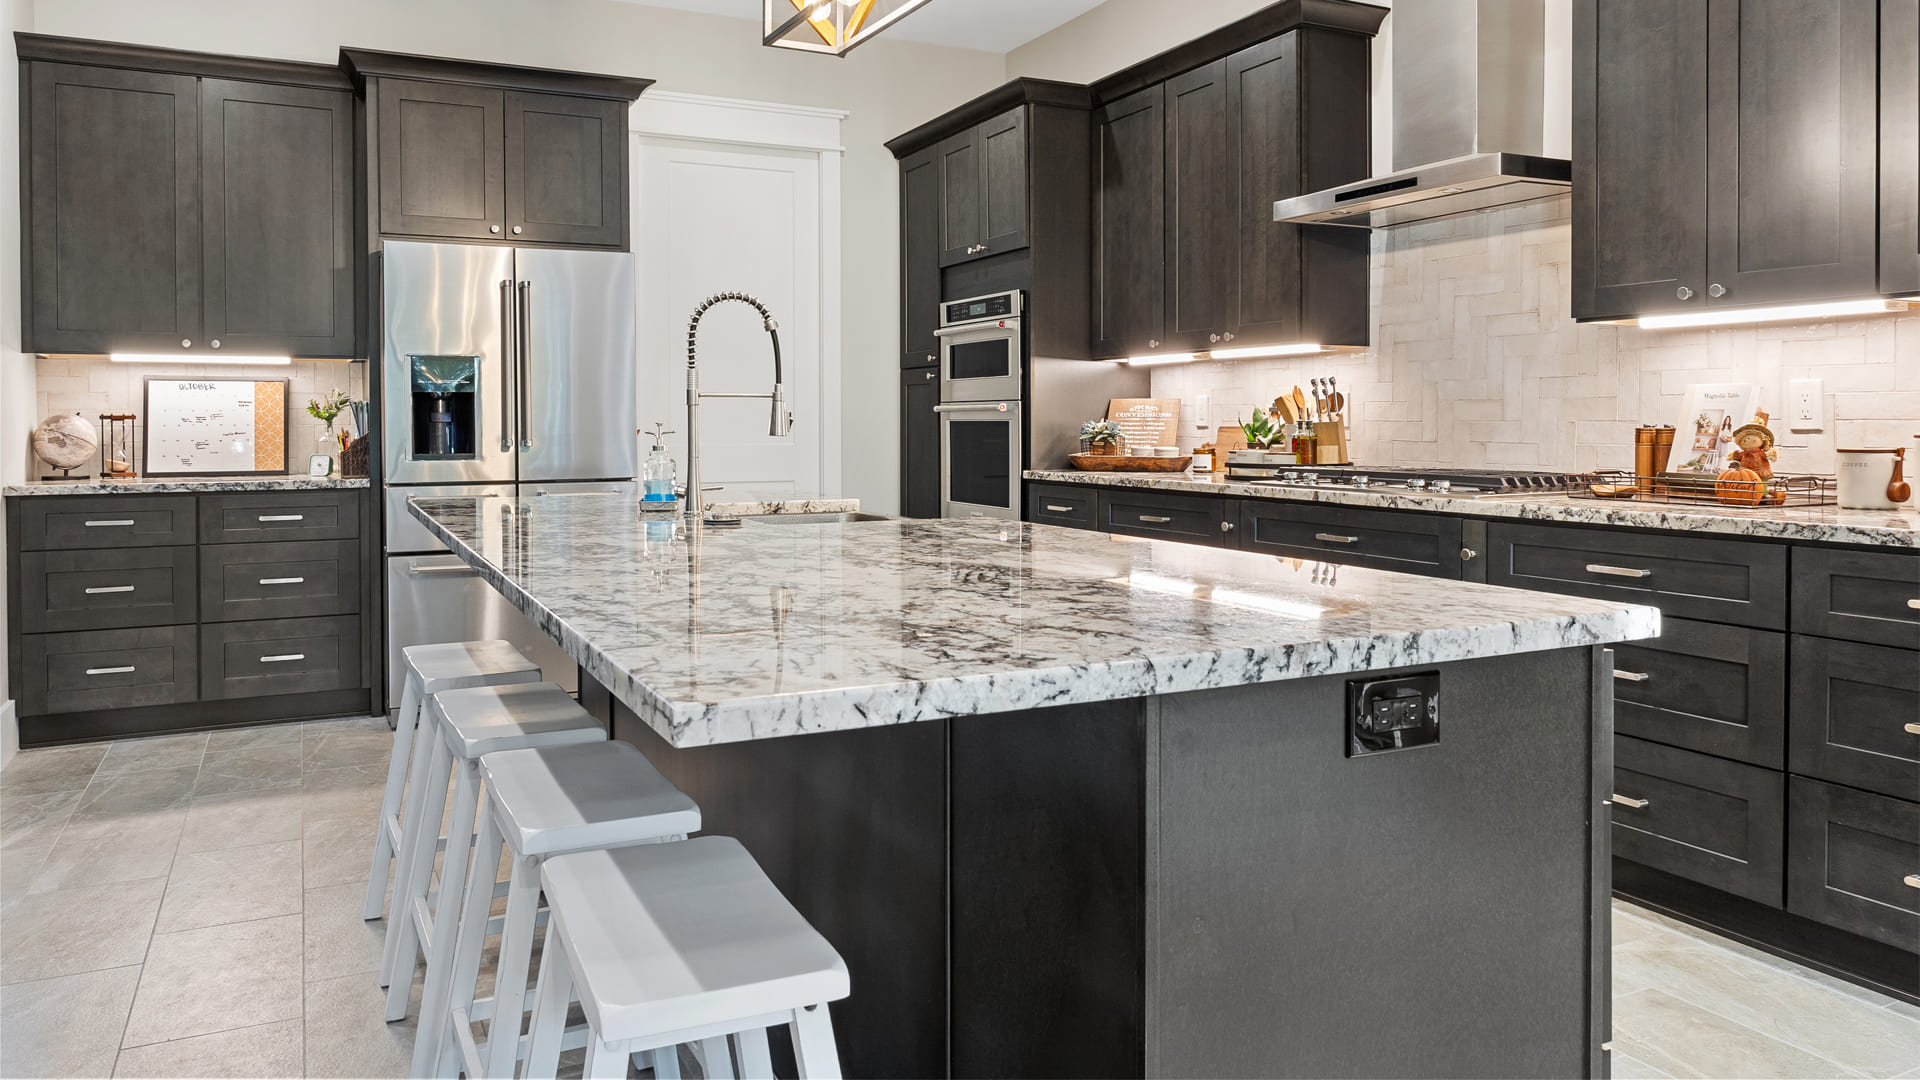 Contemporary l-shaped kitchen with charcoal gray shaker cabinets, white marbled stone countertops, and a spacious kitchen island with a built-in sink